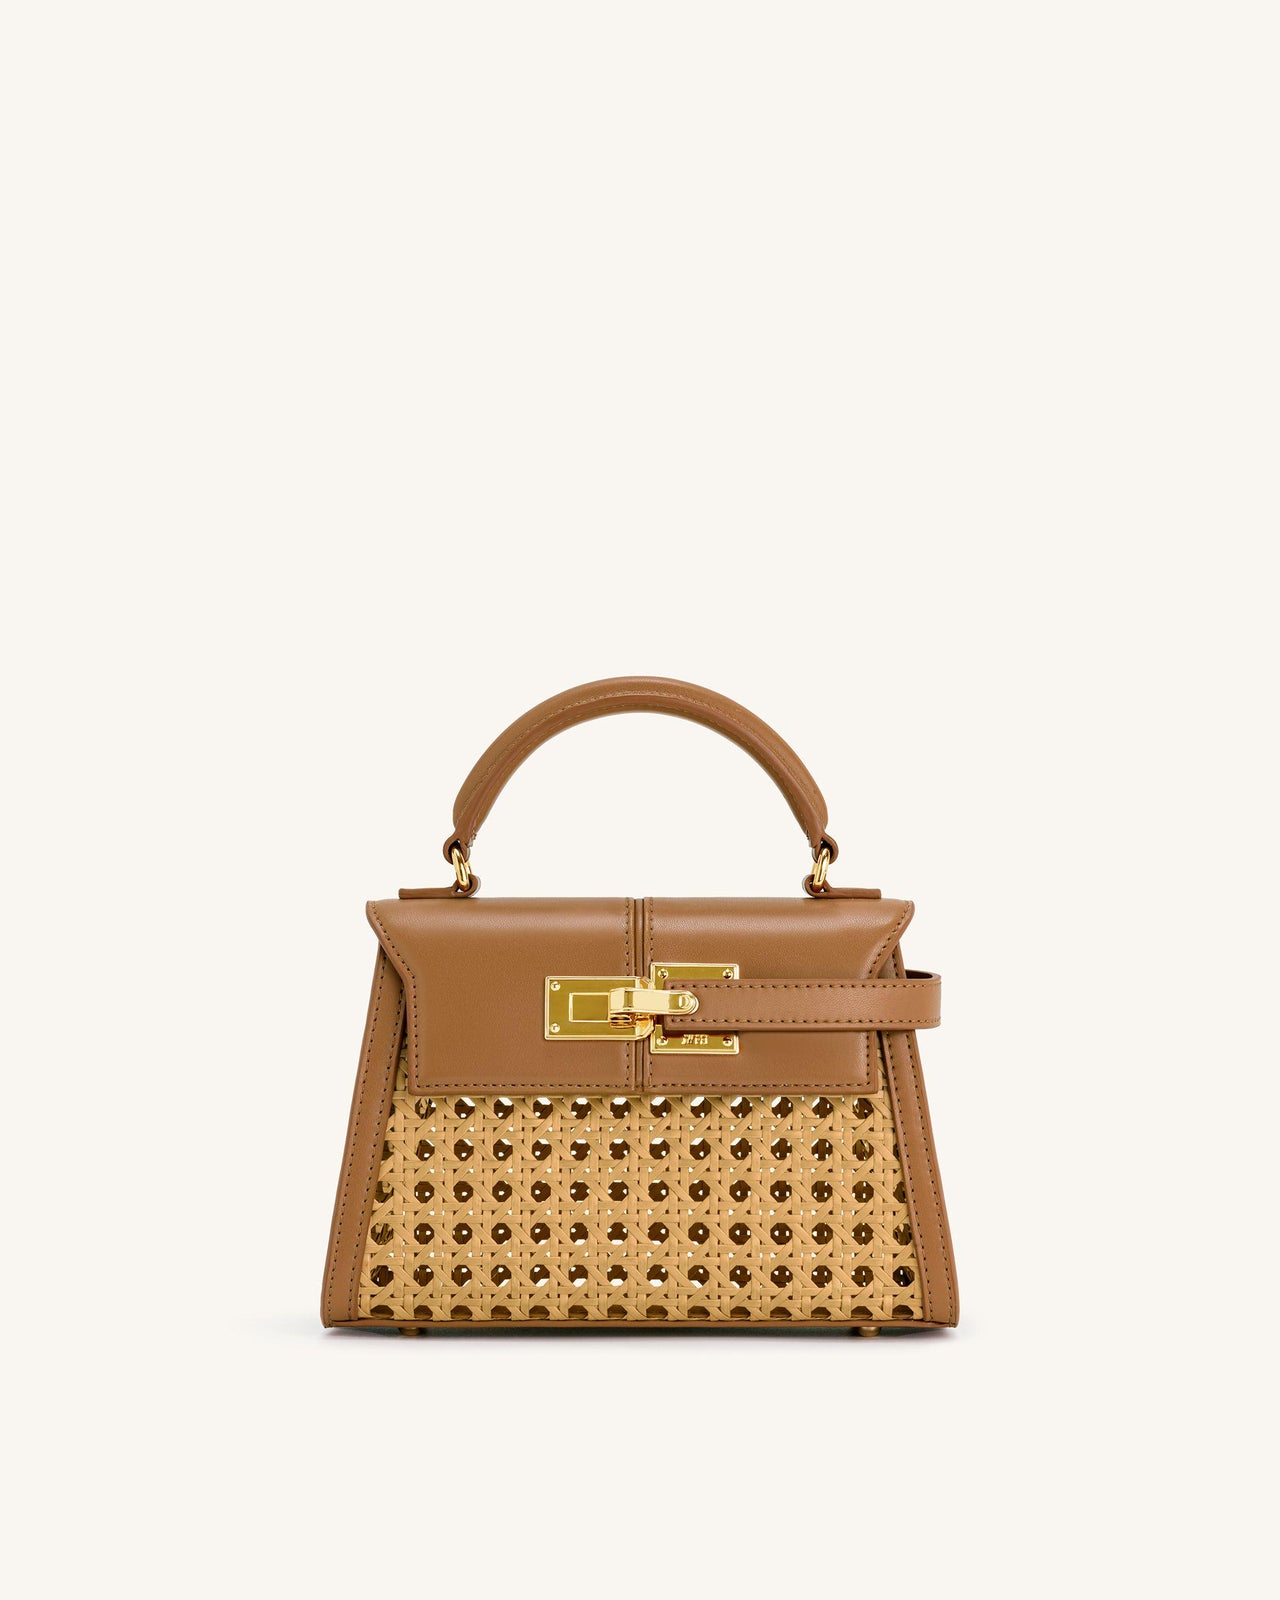 Elise Faux Bamboo Woven Top Handle Bag - Brown